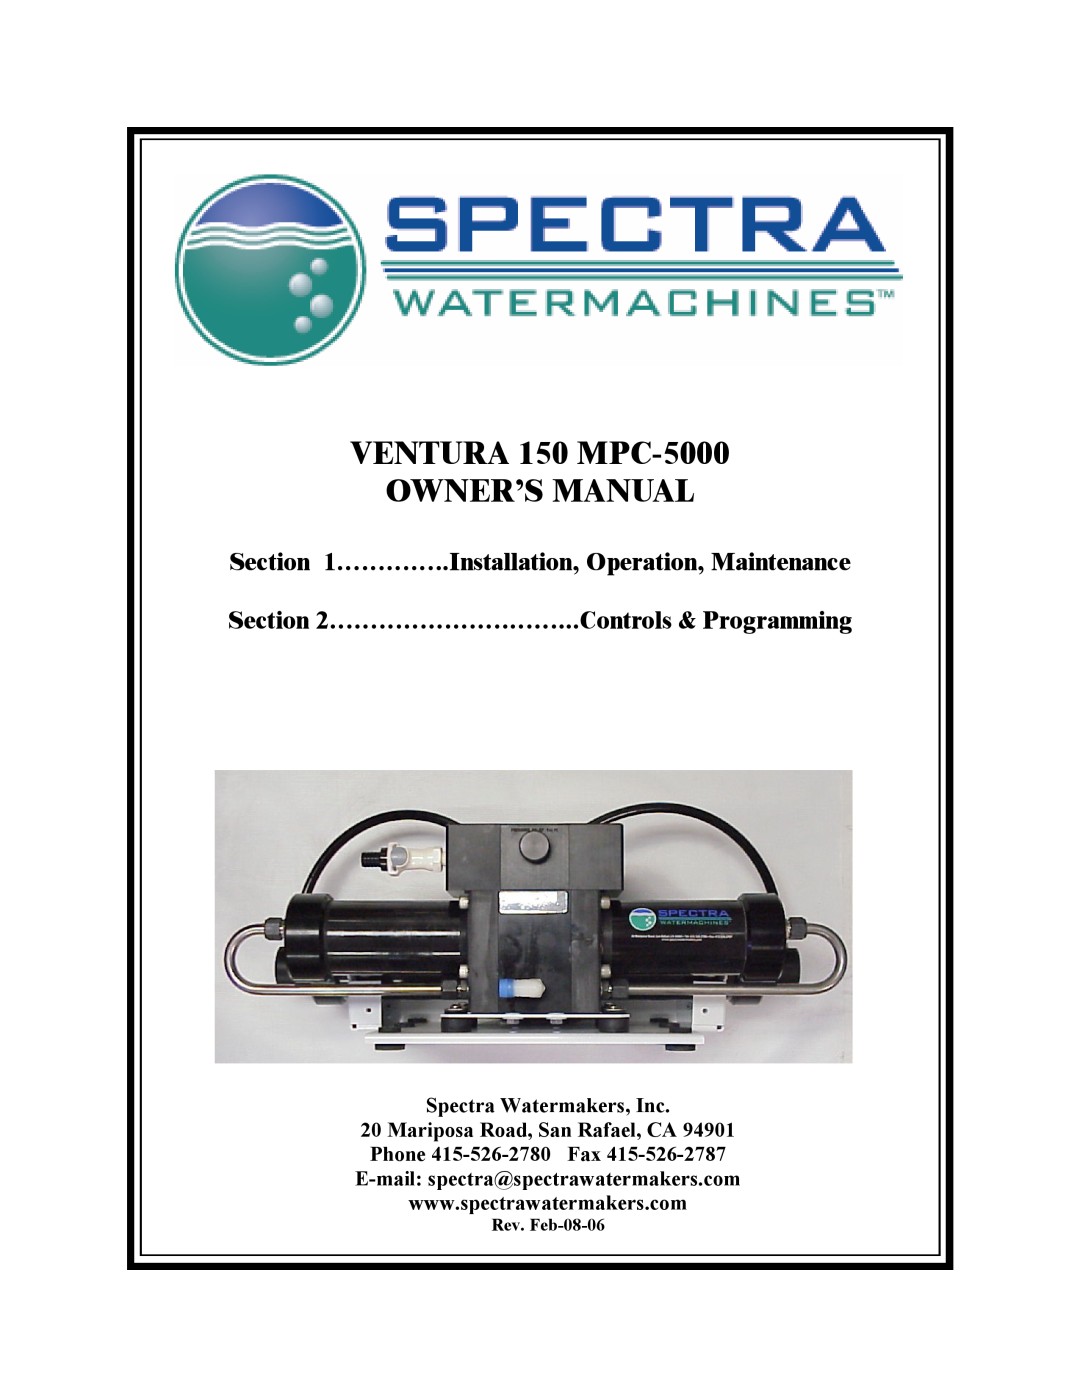 Spectra Watermakers MPC-5000 owner manual 